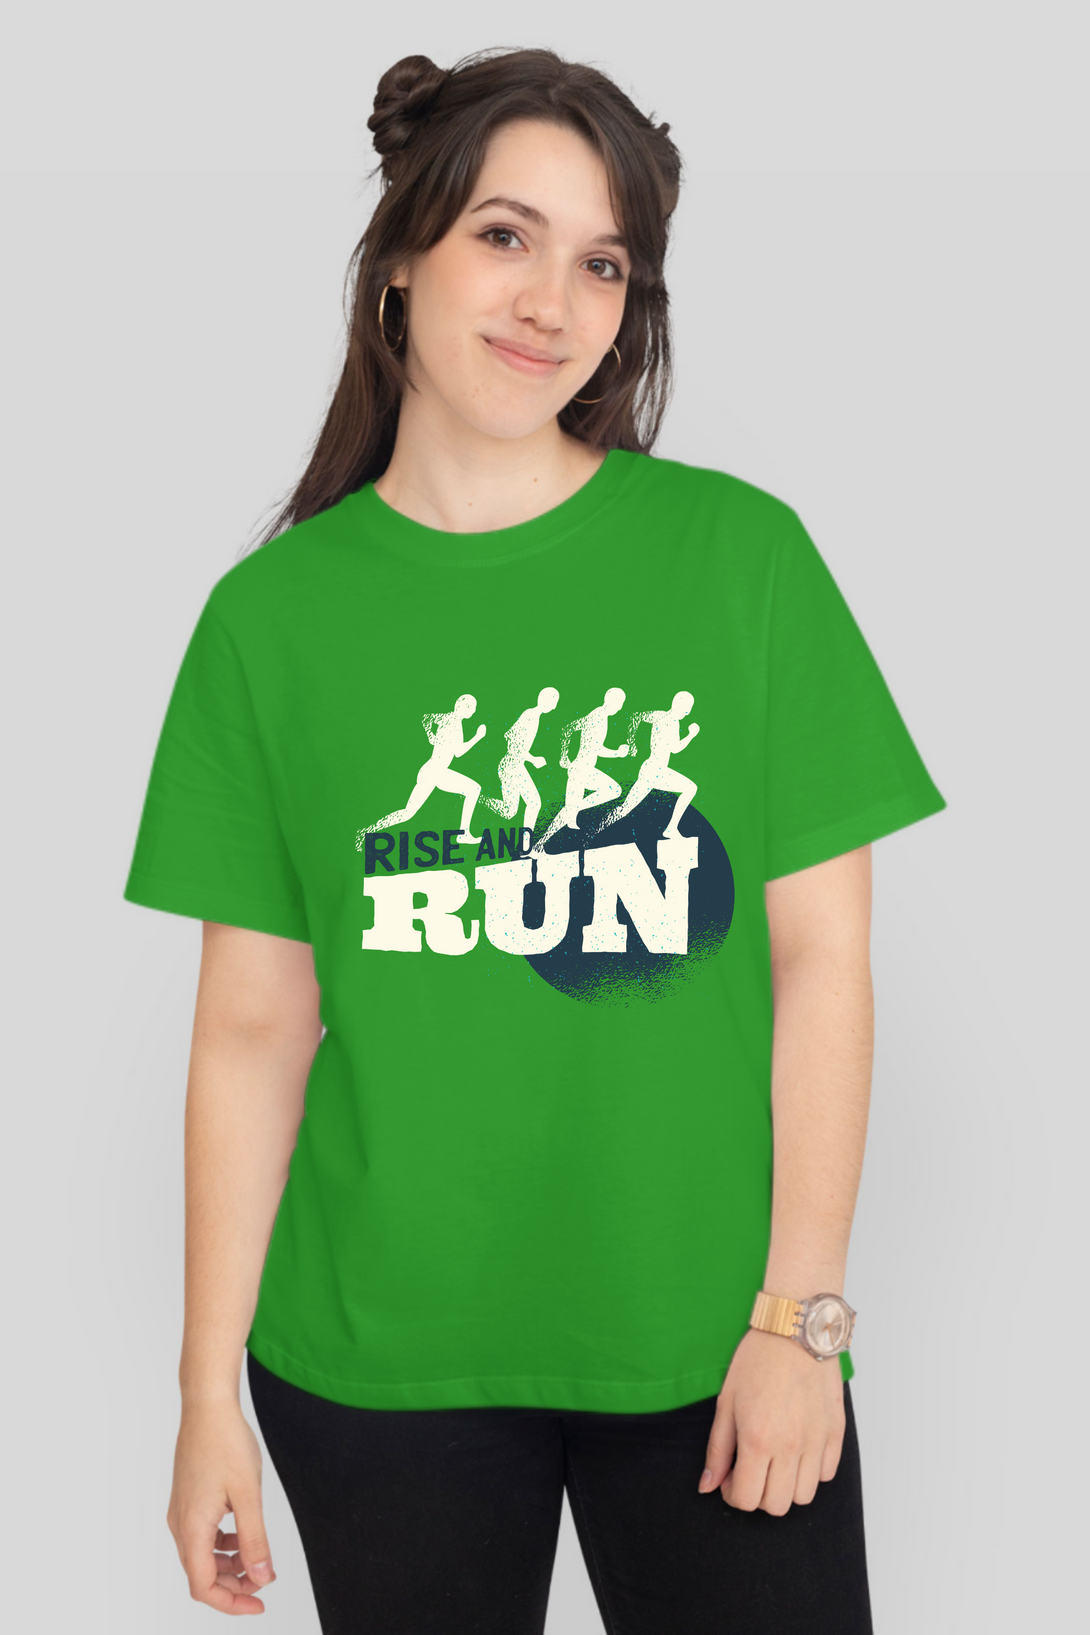 Rise And Run Printed T-Shirt For Women - WowWaves - 10